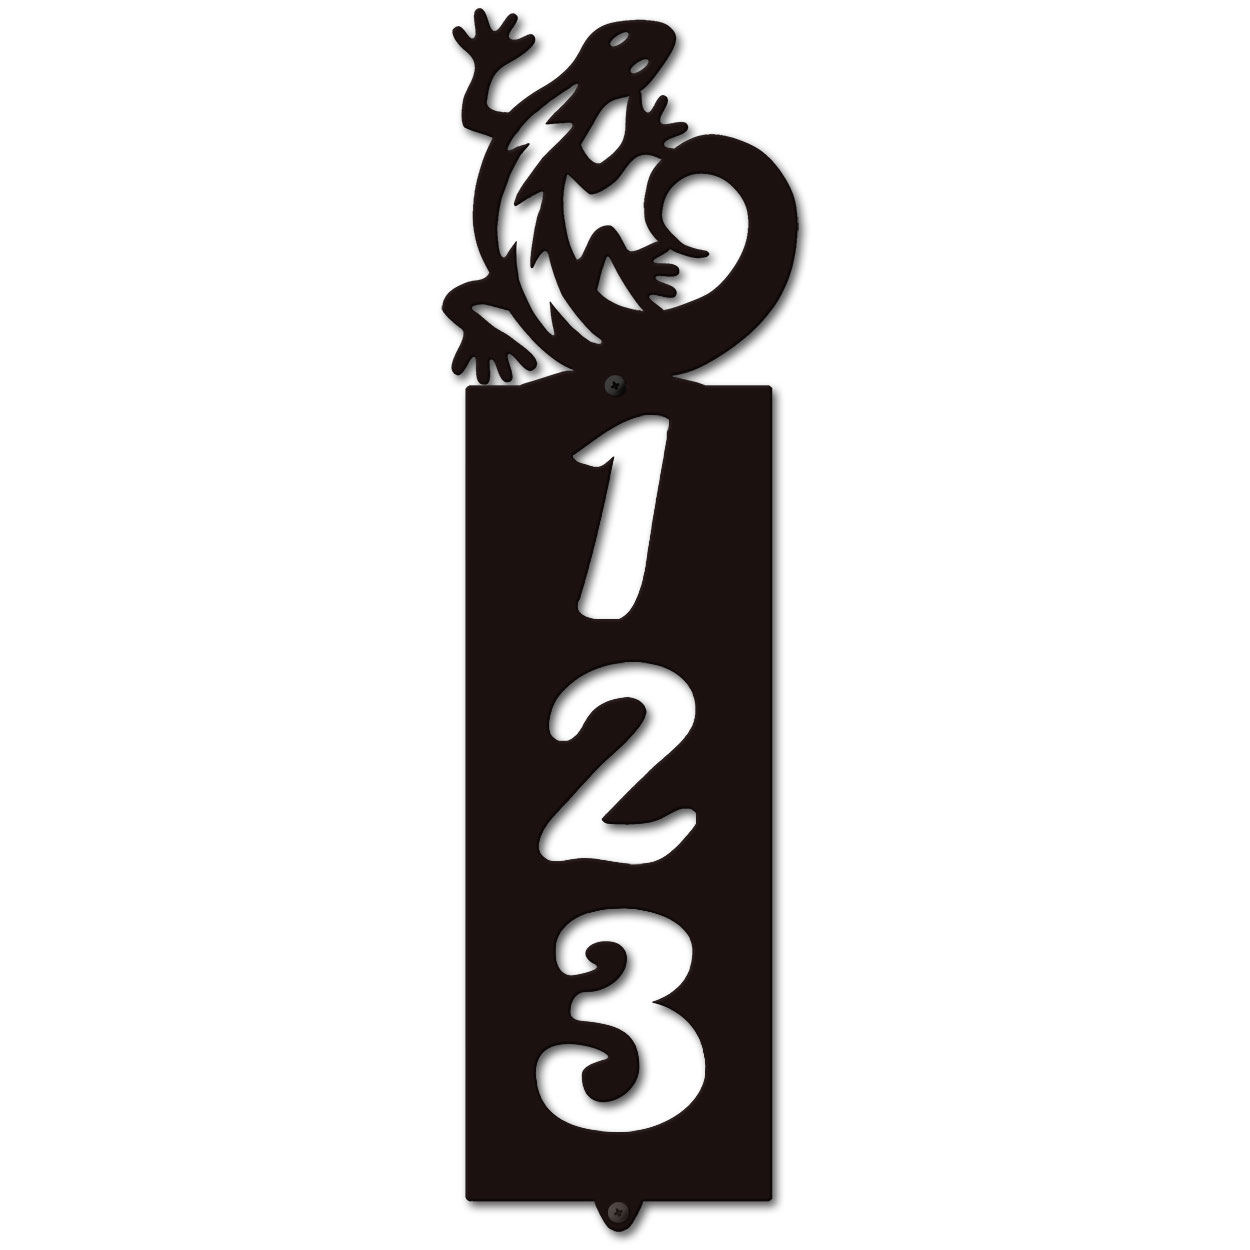 635103 - C-Shaped Gecko Cut Outs Three Digit Address Number Plaque